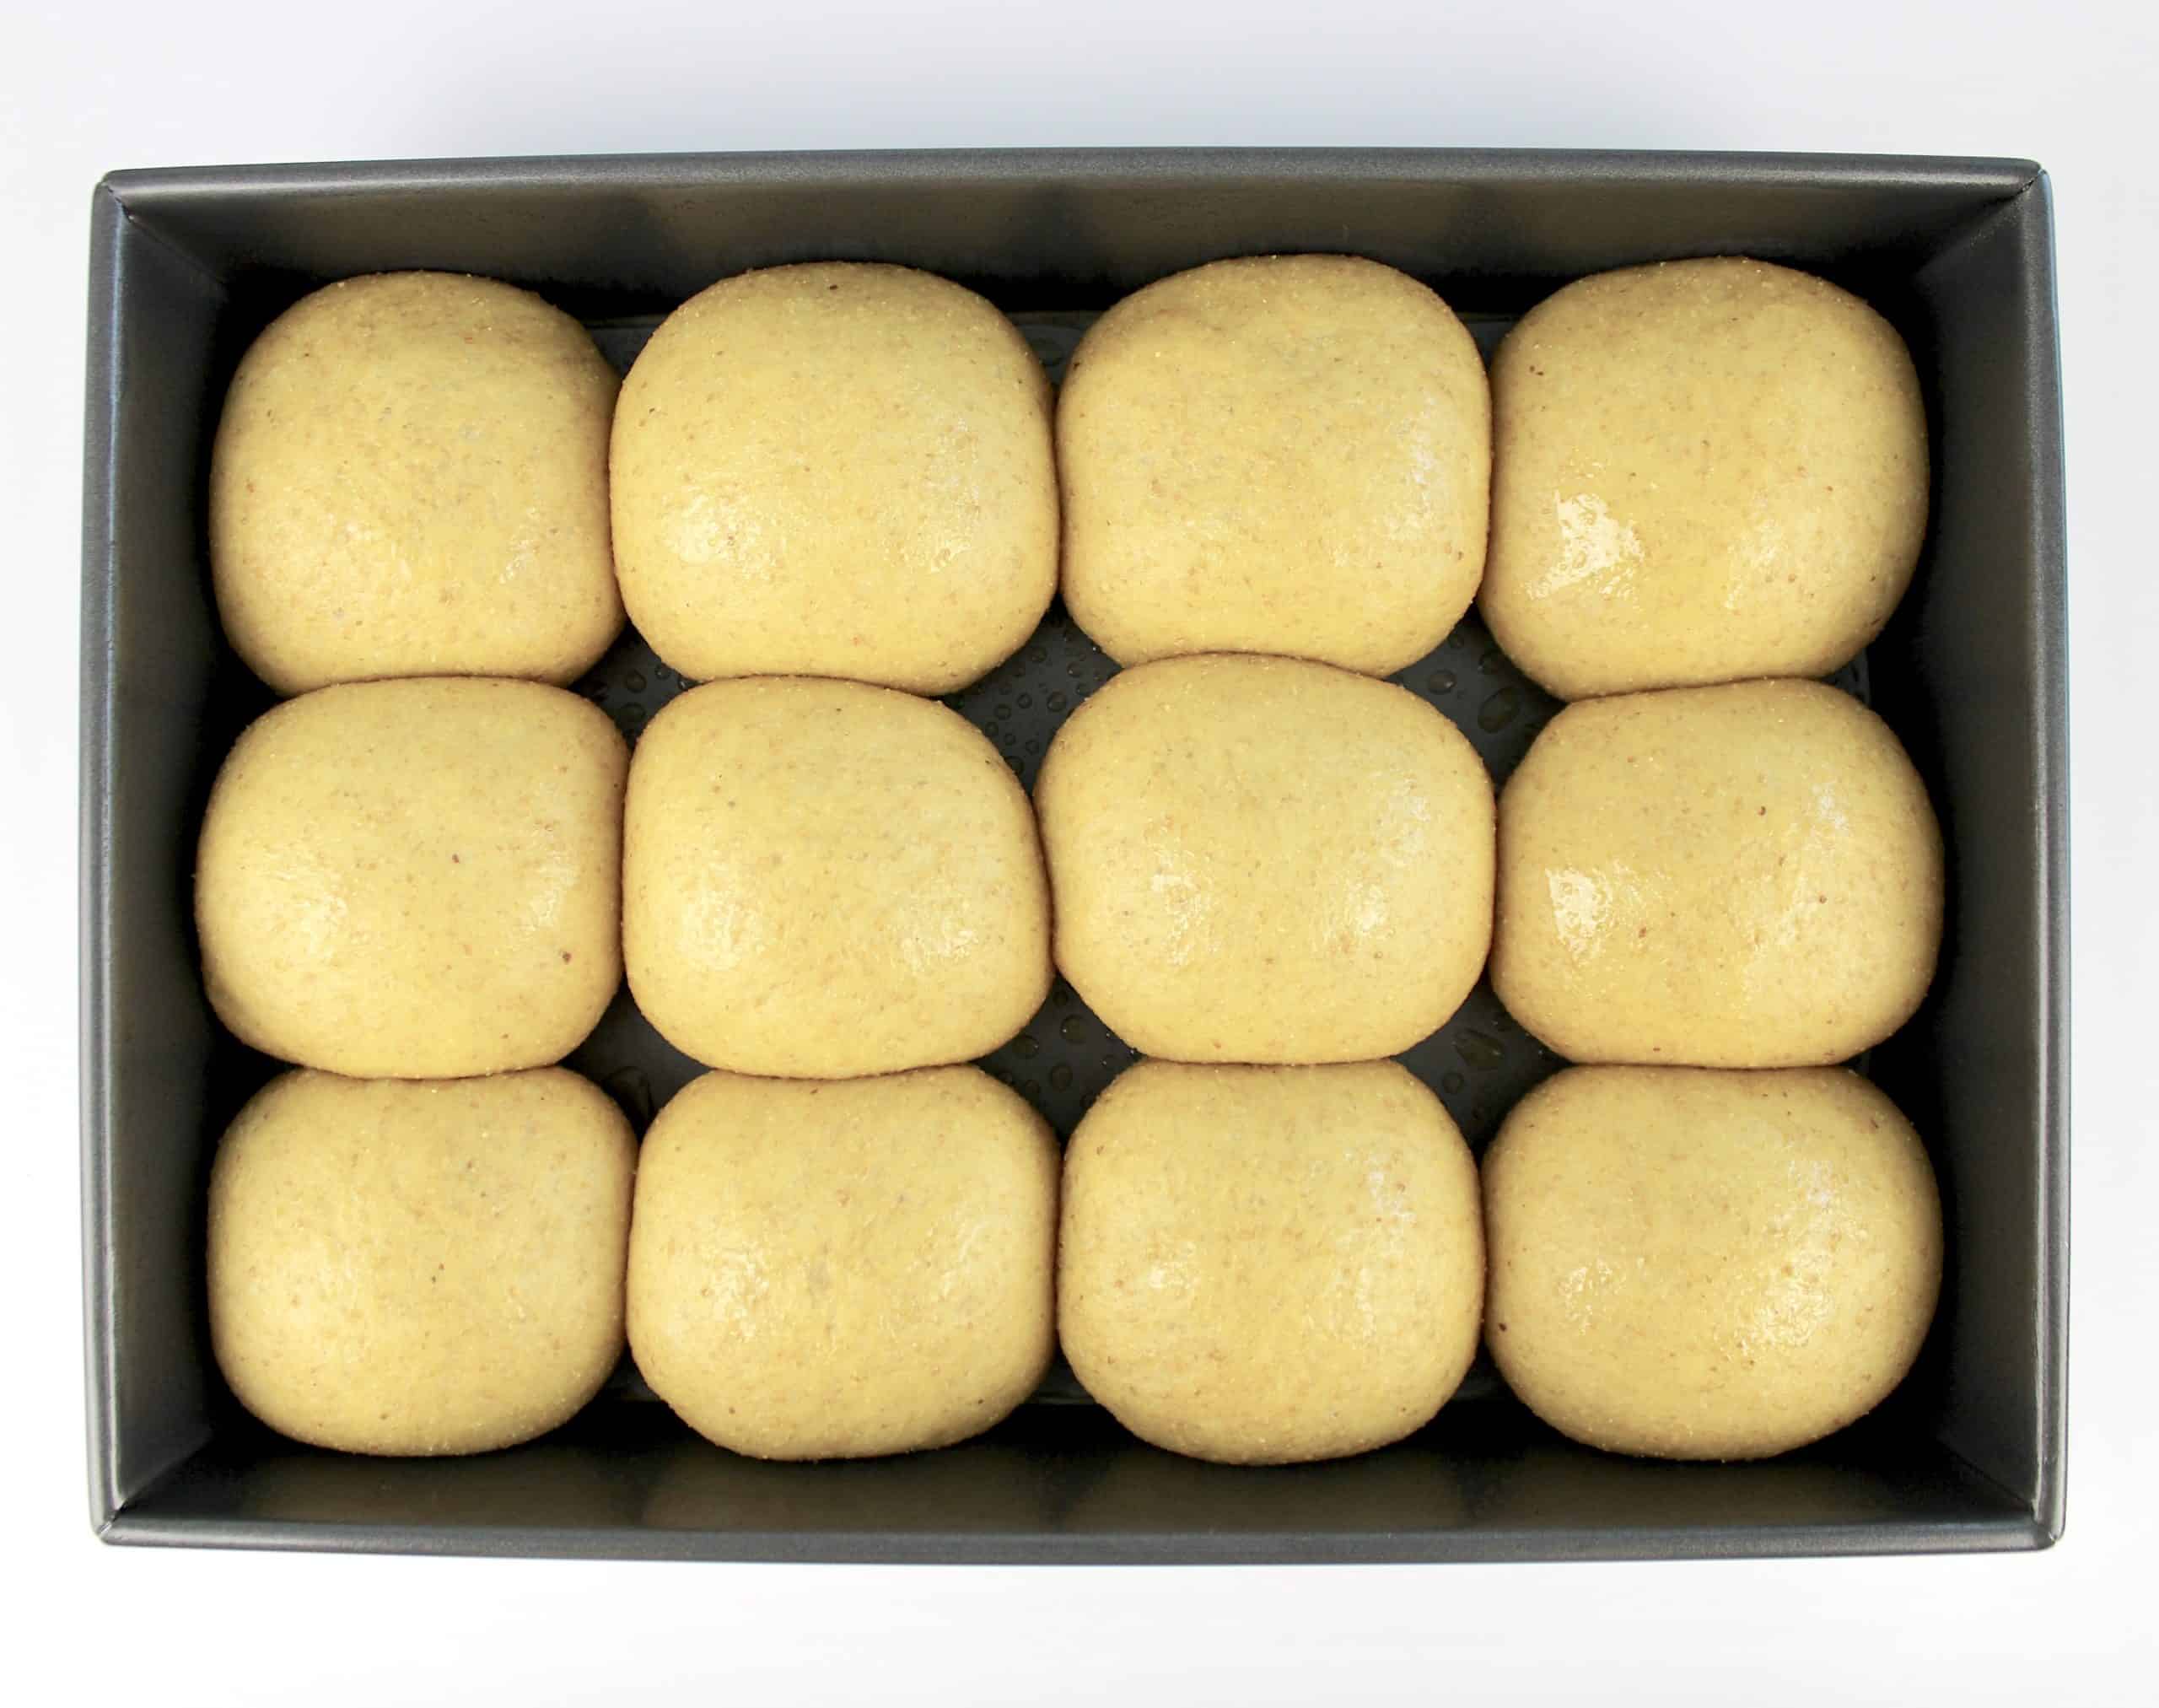 15 dough balls proofed and puffed up in baking pan